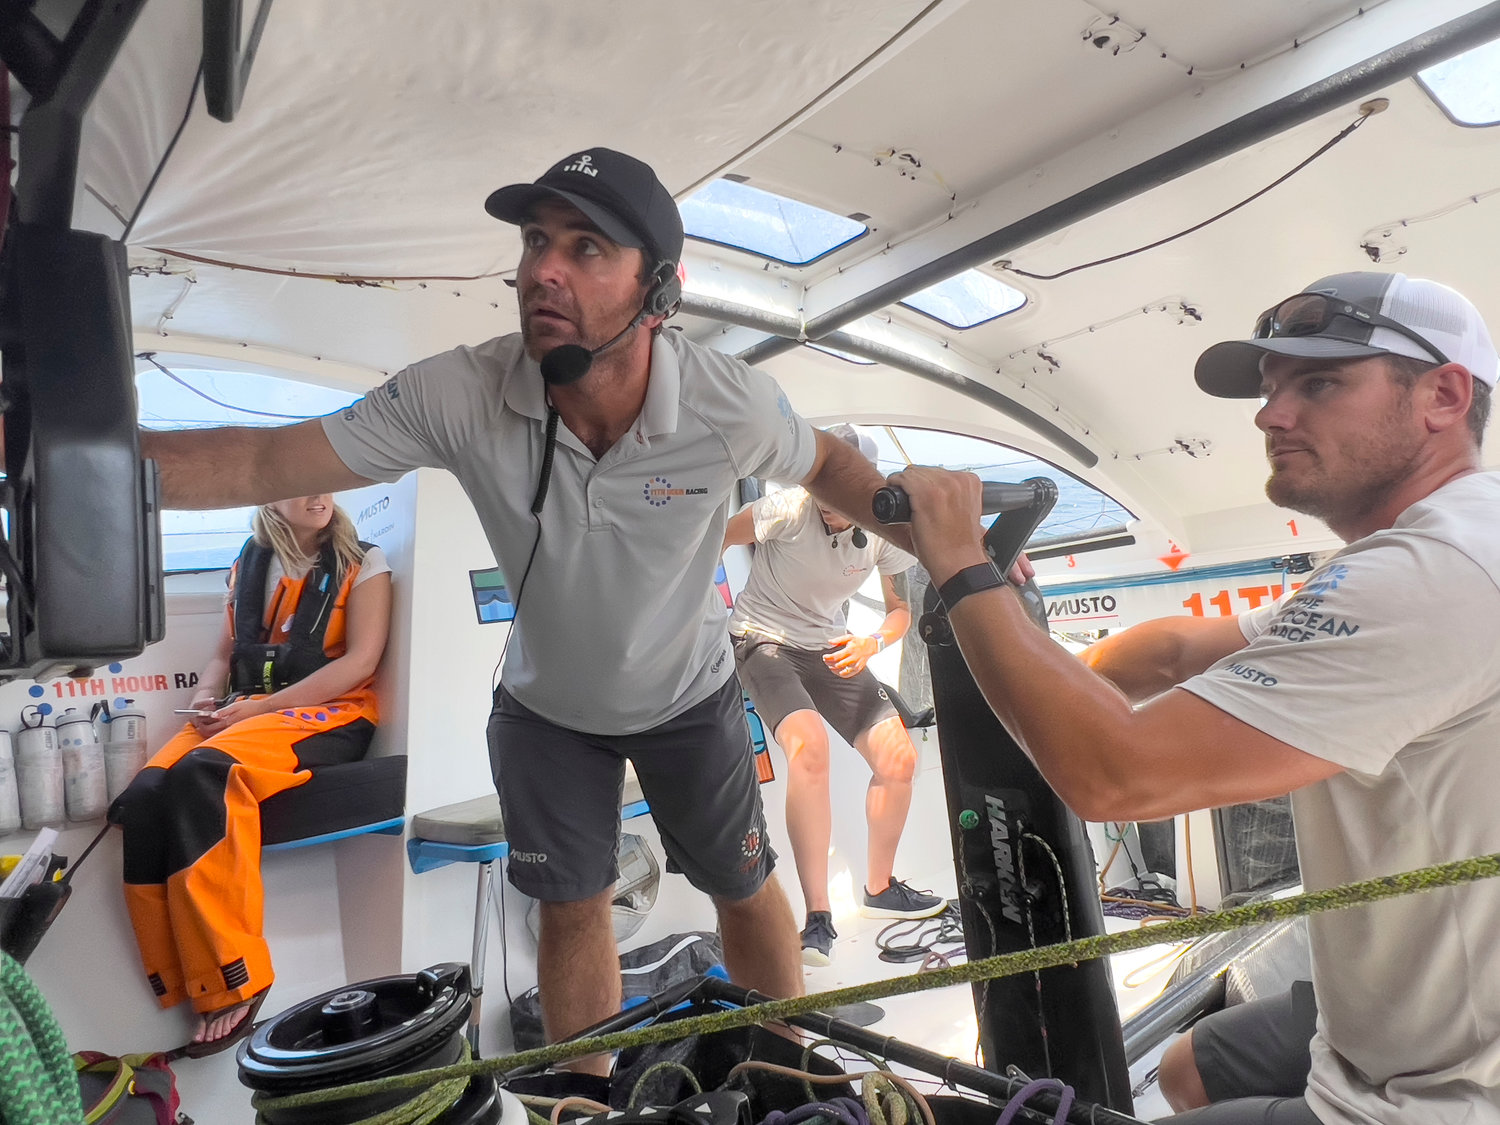 Skipper Charlie Enright (left) checks a GPS map on a touchscreen computer while James O’Mahony looks before making a tack belowdeck.